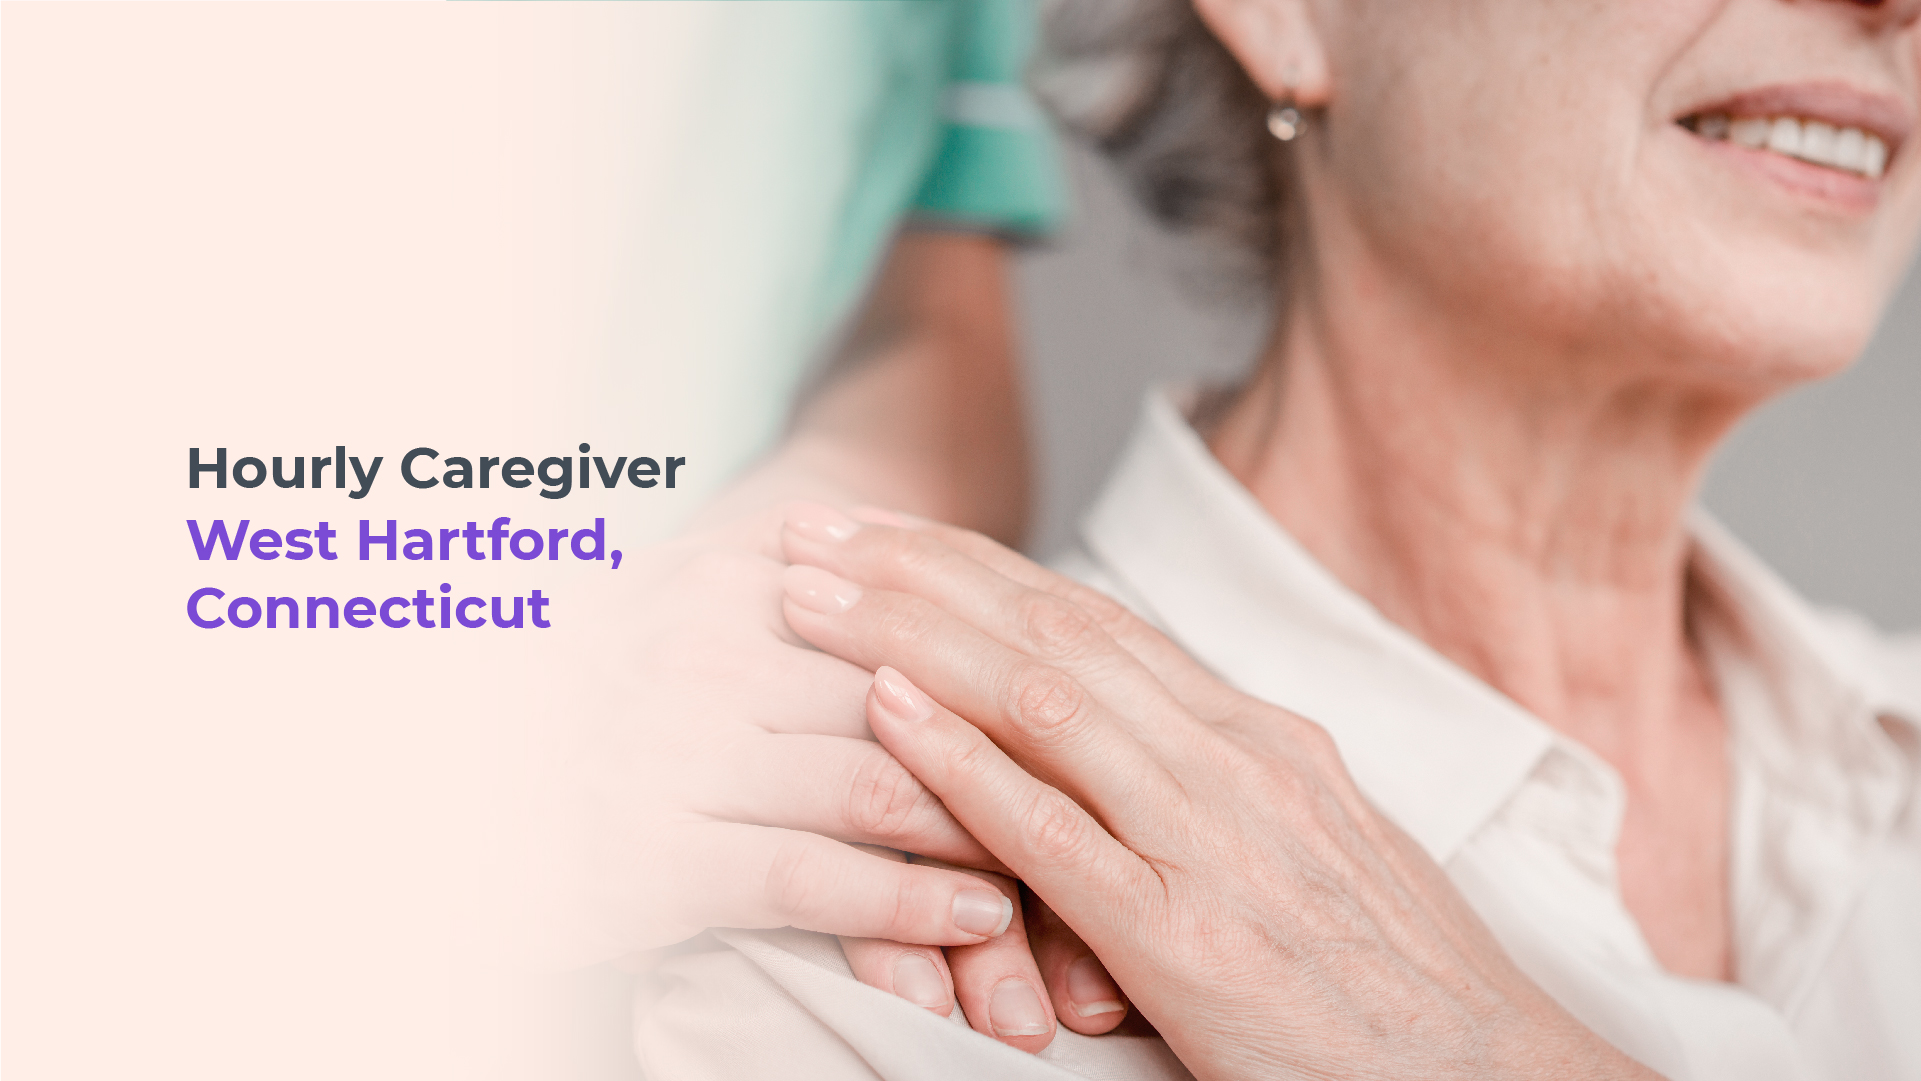 Hourly Caregivers in West Hartford Connecticut.jpg